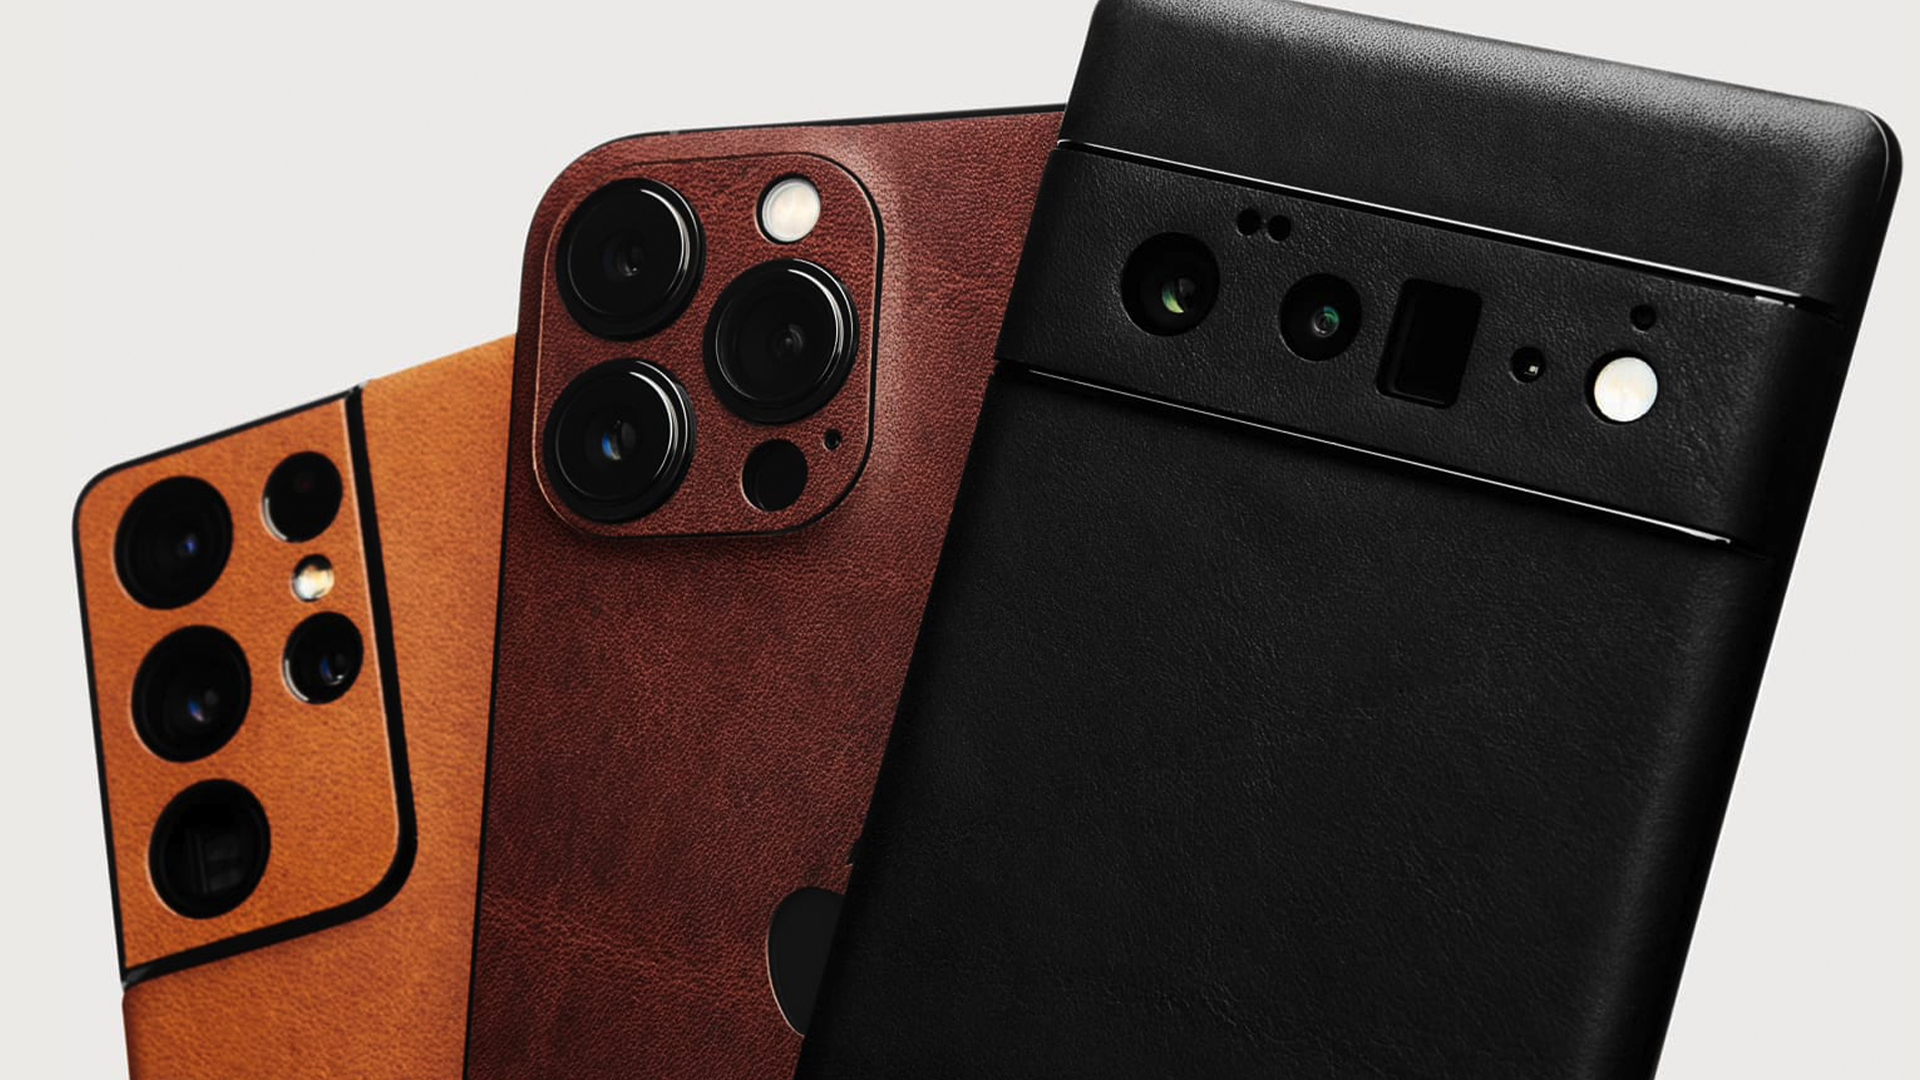 dbrand’s Limited-Edition Leather Phone Skins Make Their Glorious Return – Review Geek